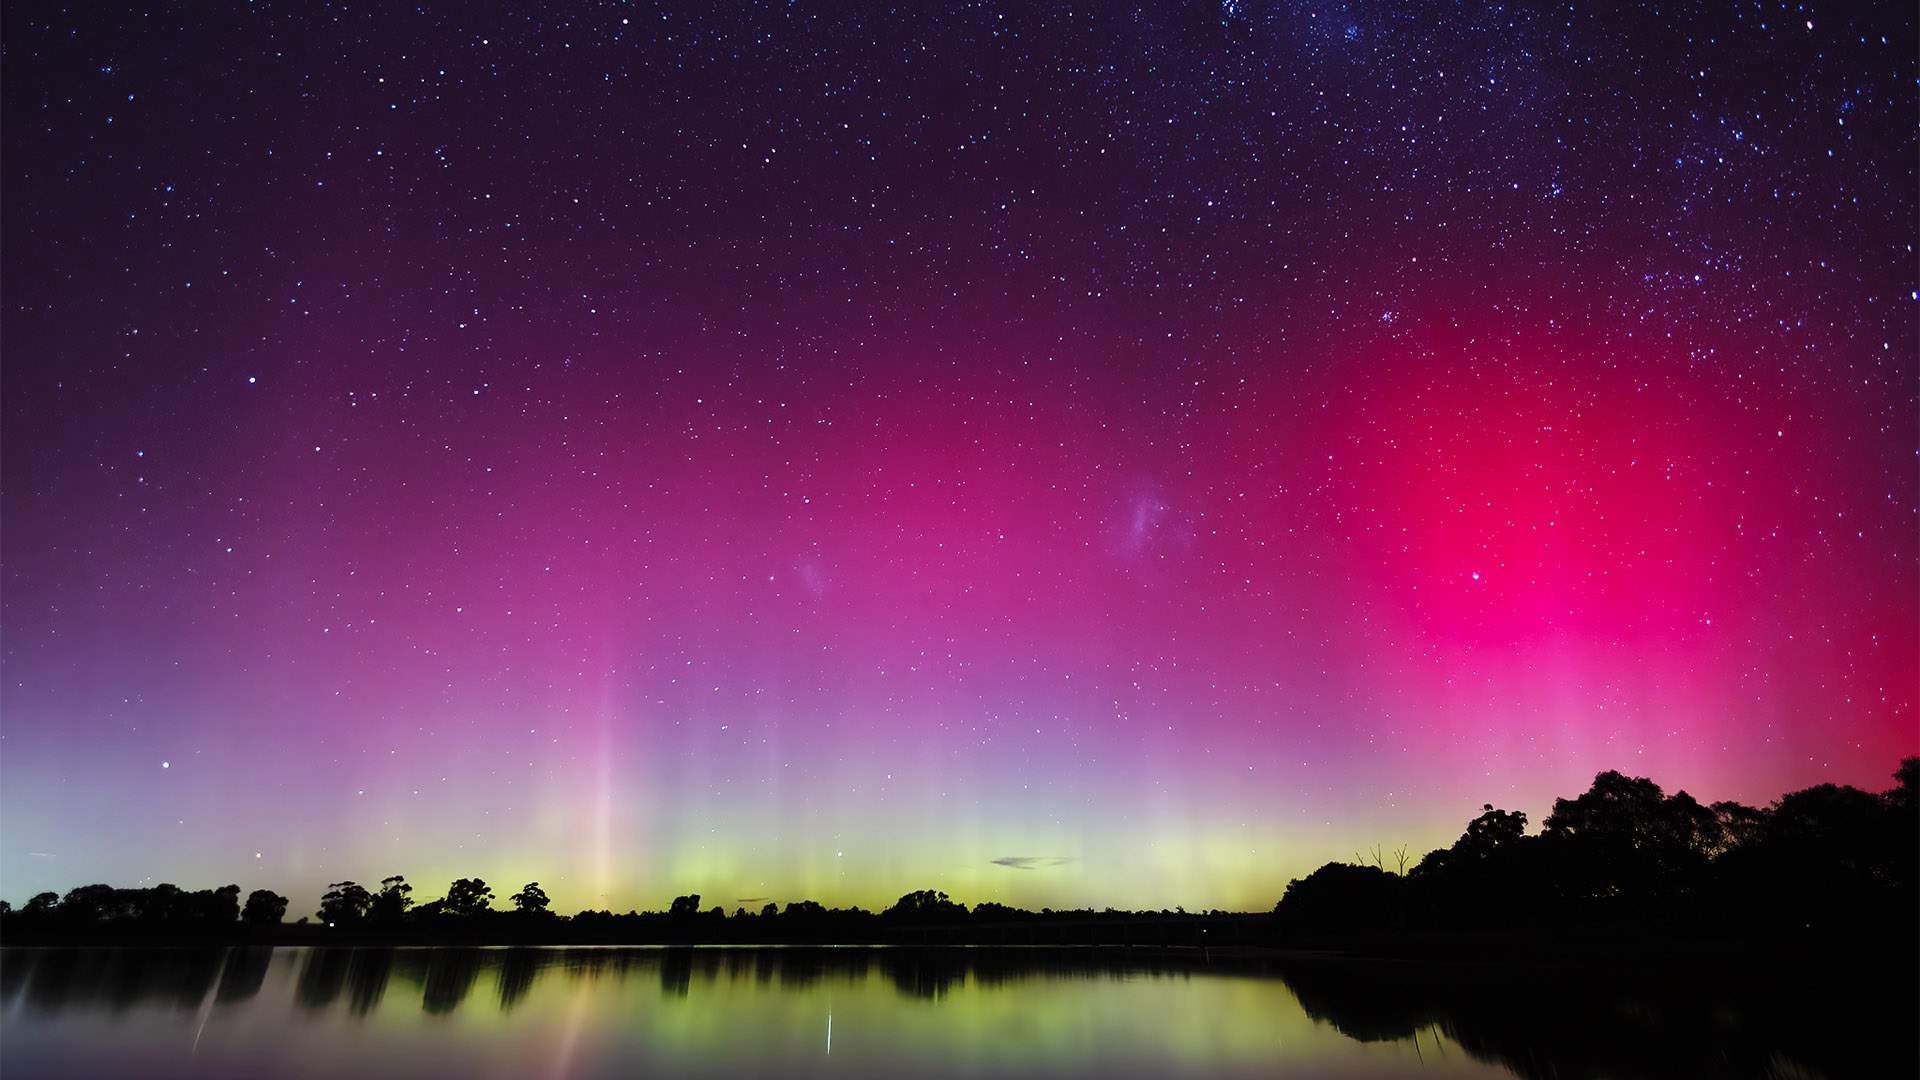 Here Are Some of the Stunning Photos of the Aurora Australis If You Missed the Southern Lights Putting on a Show